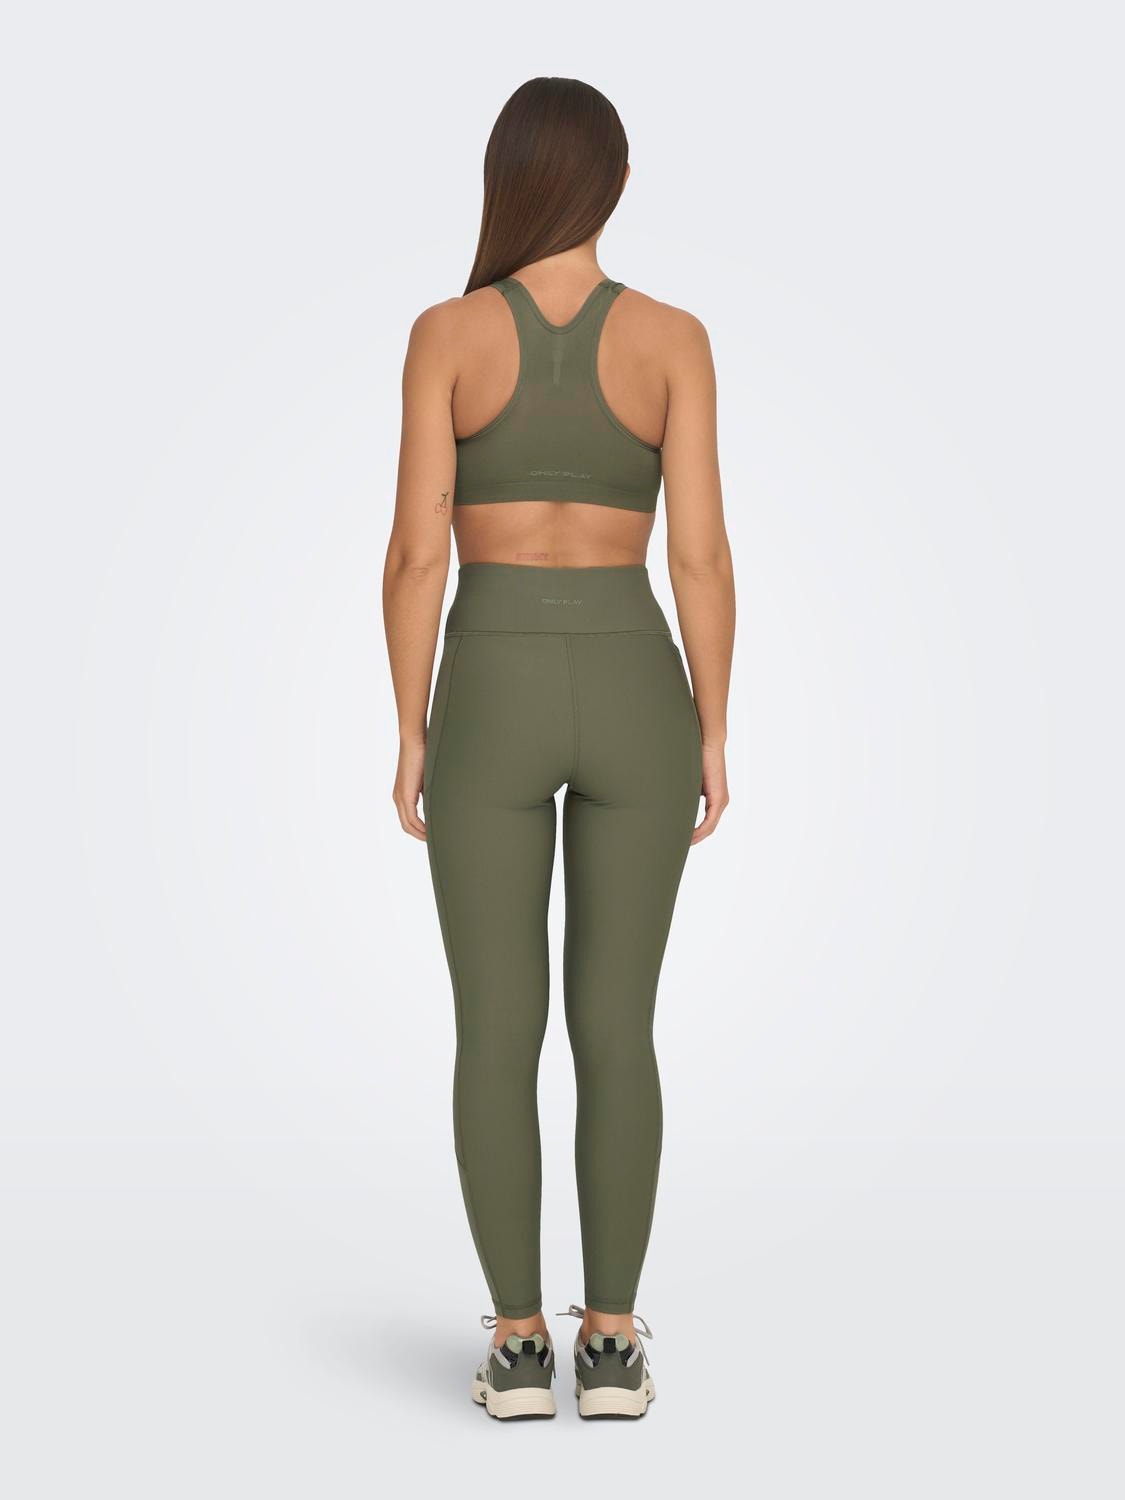 ONLY Seamless Sports Bra -Dusty Olive - 15132244